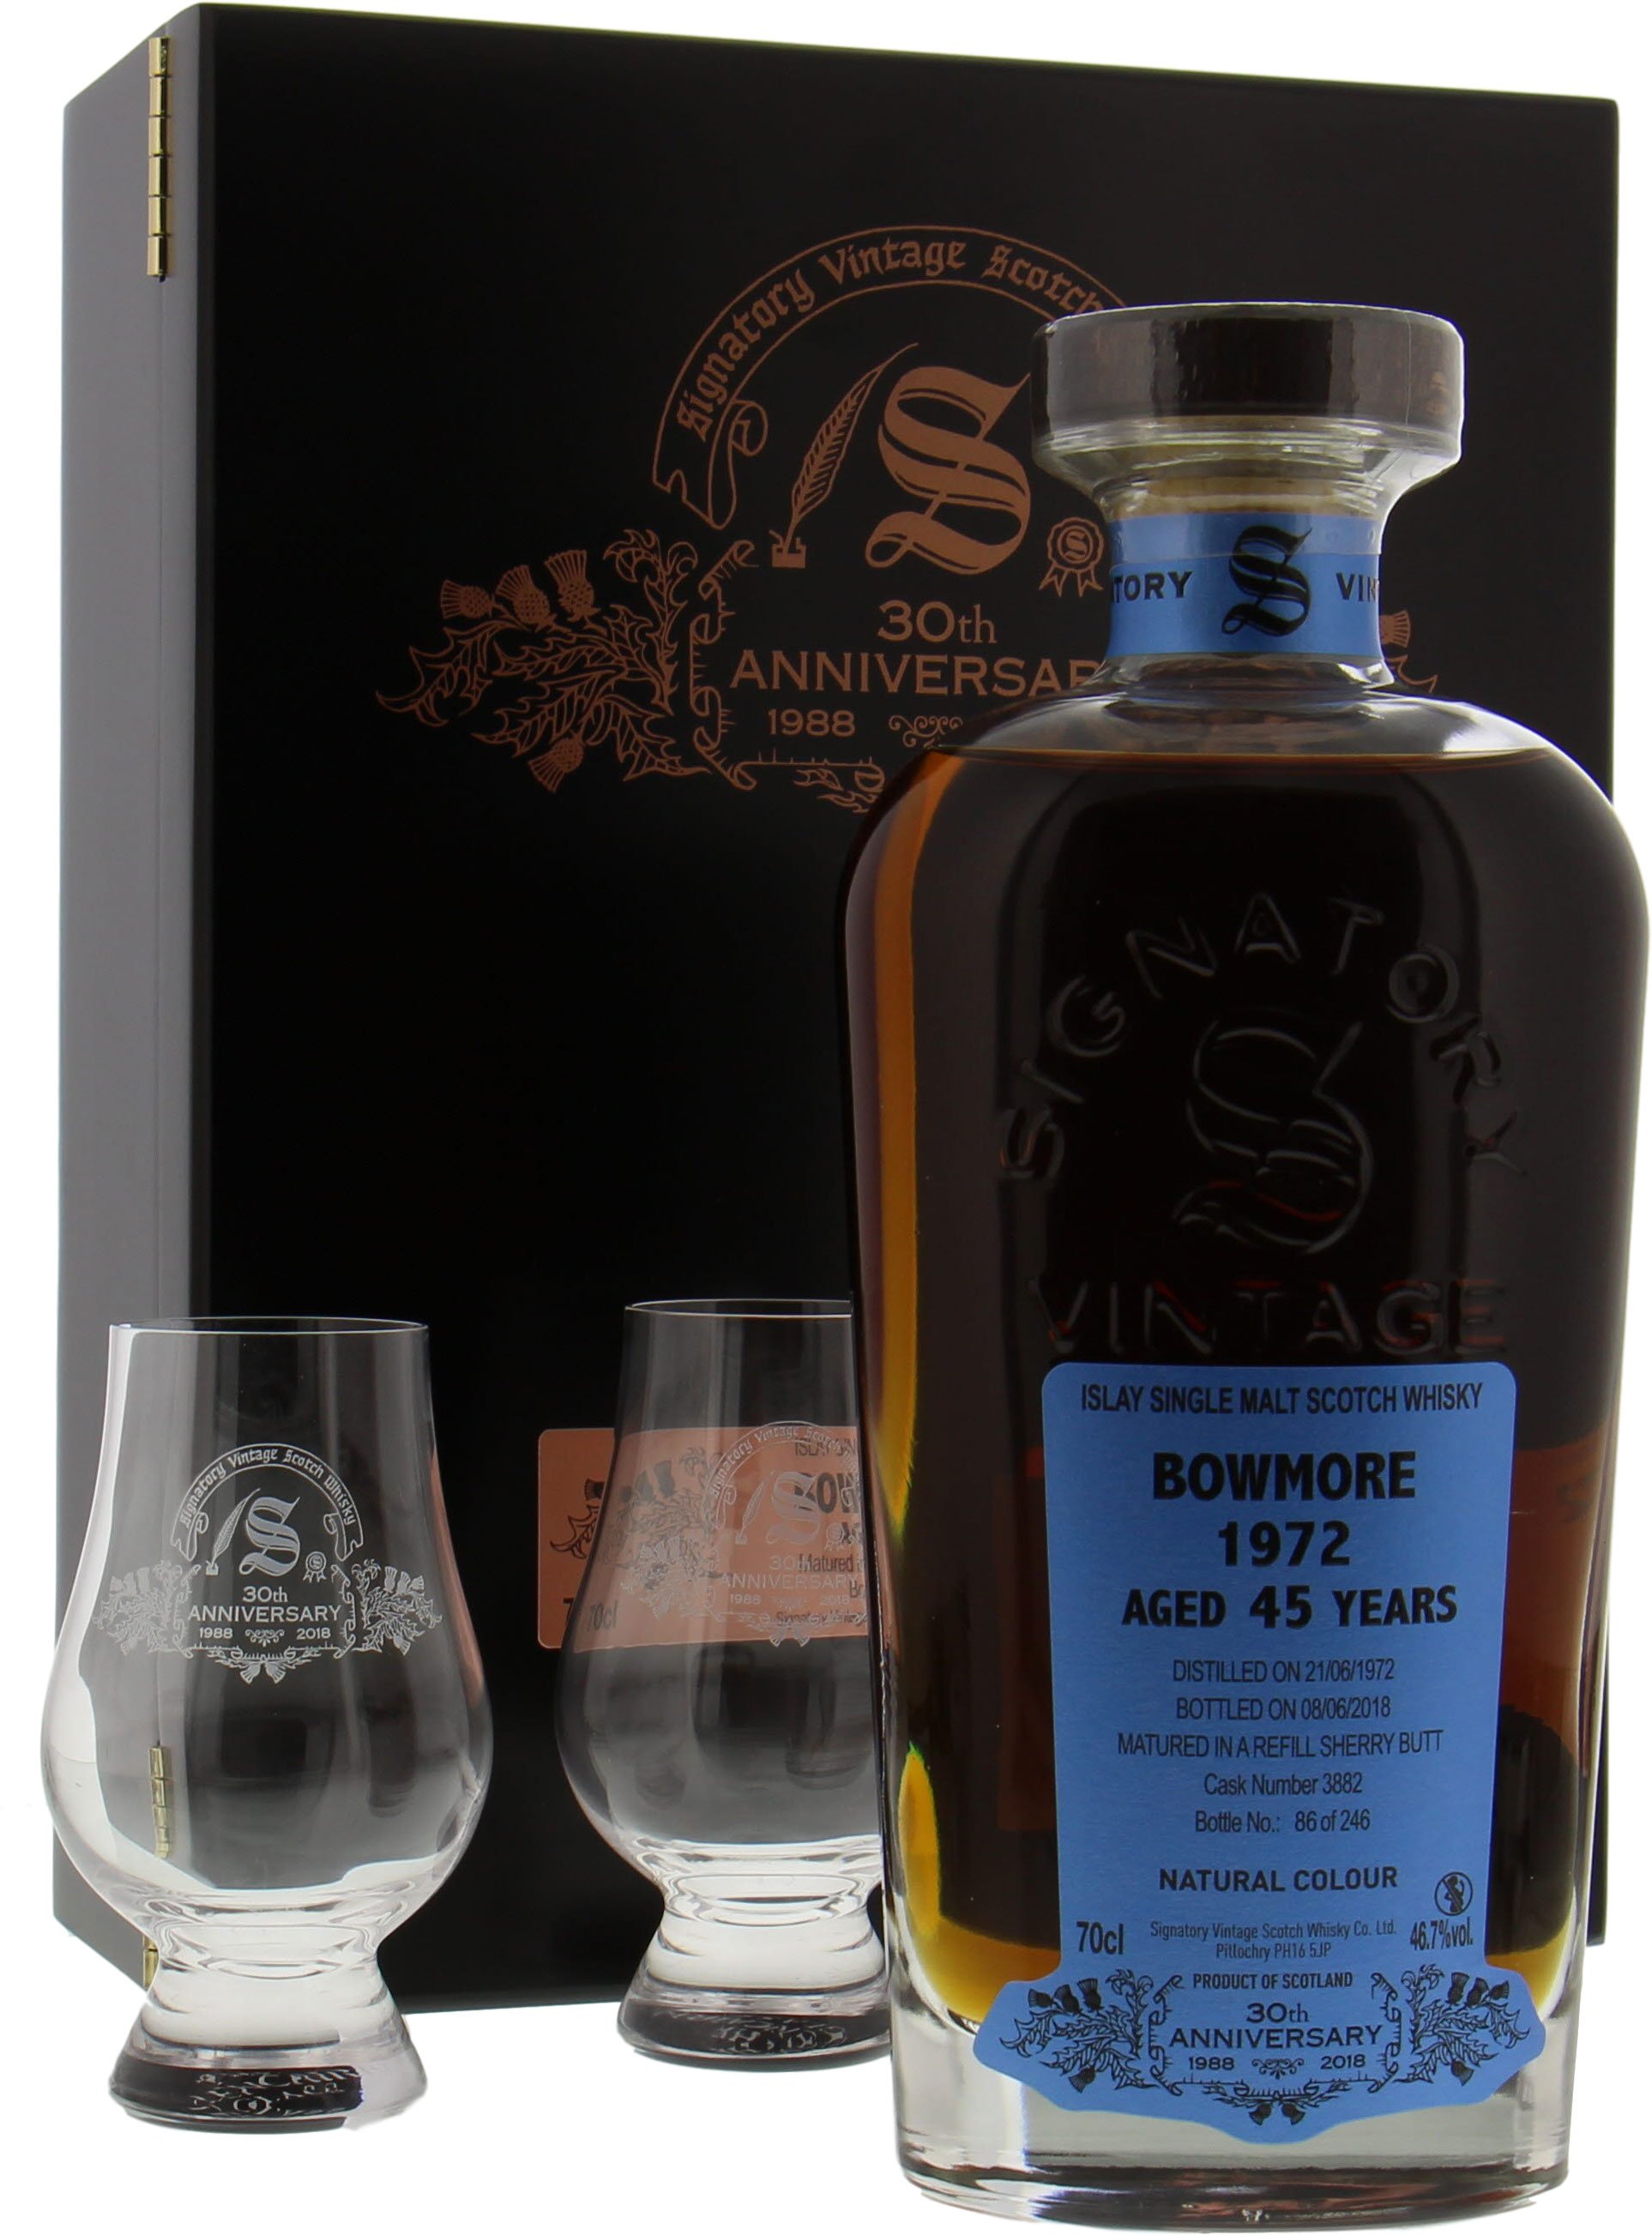 Bowmore - 45 Years Old Signatory 30th Anniversary Cask 3882 46.7% 1972